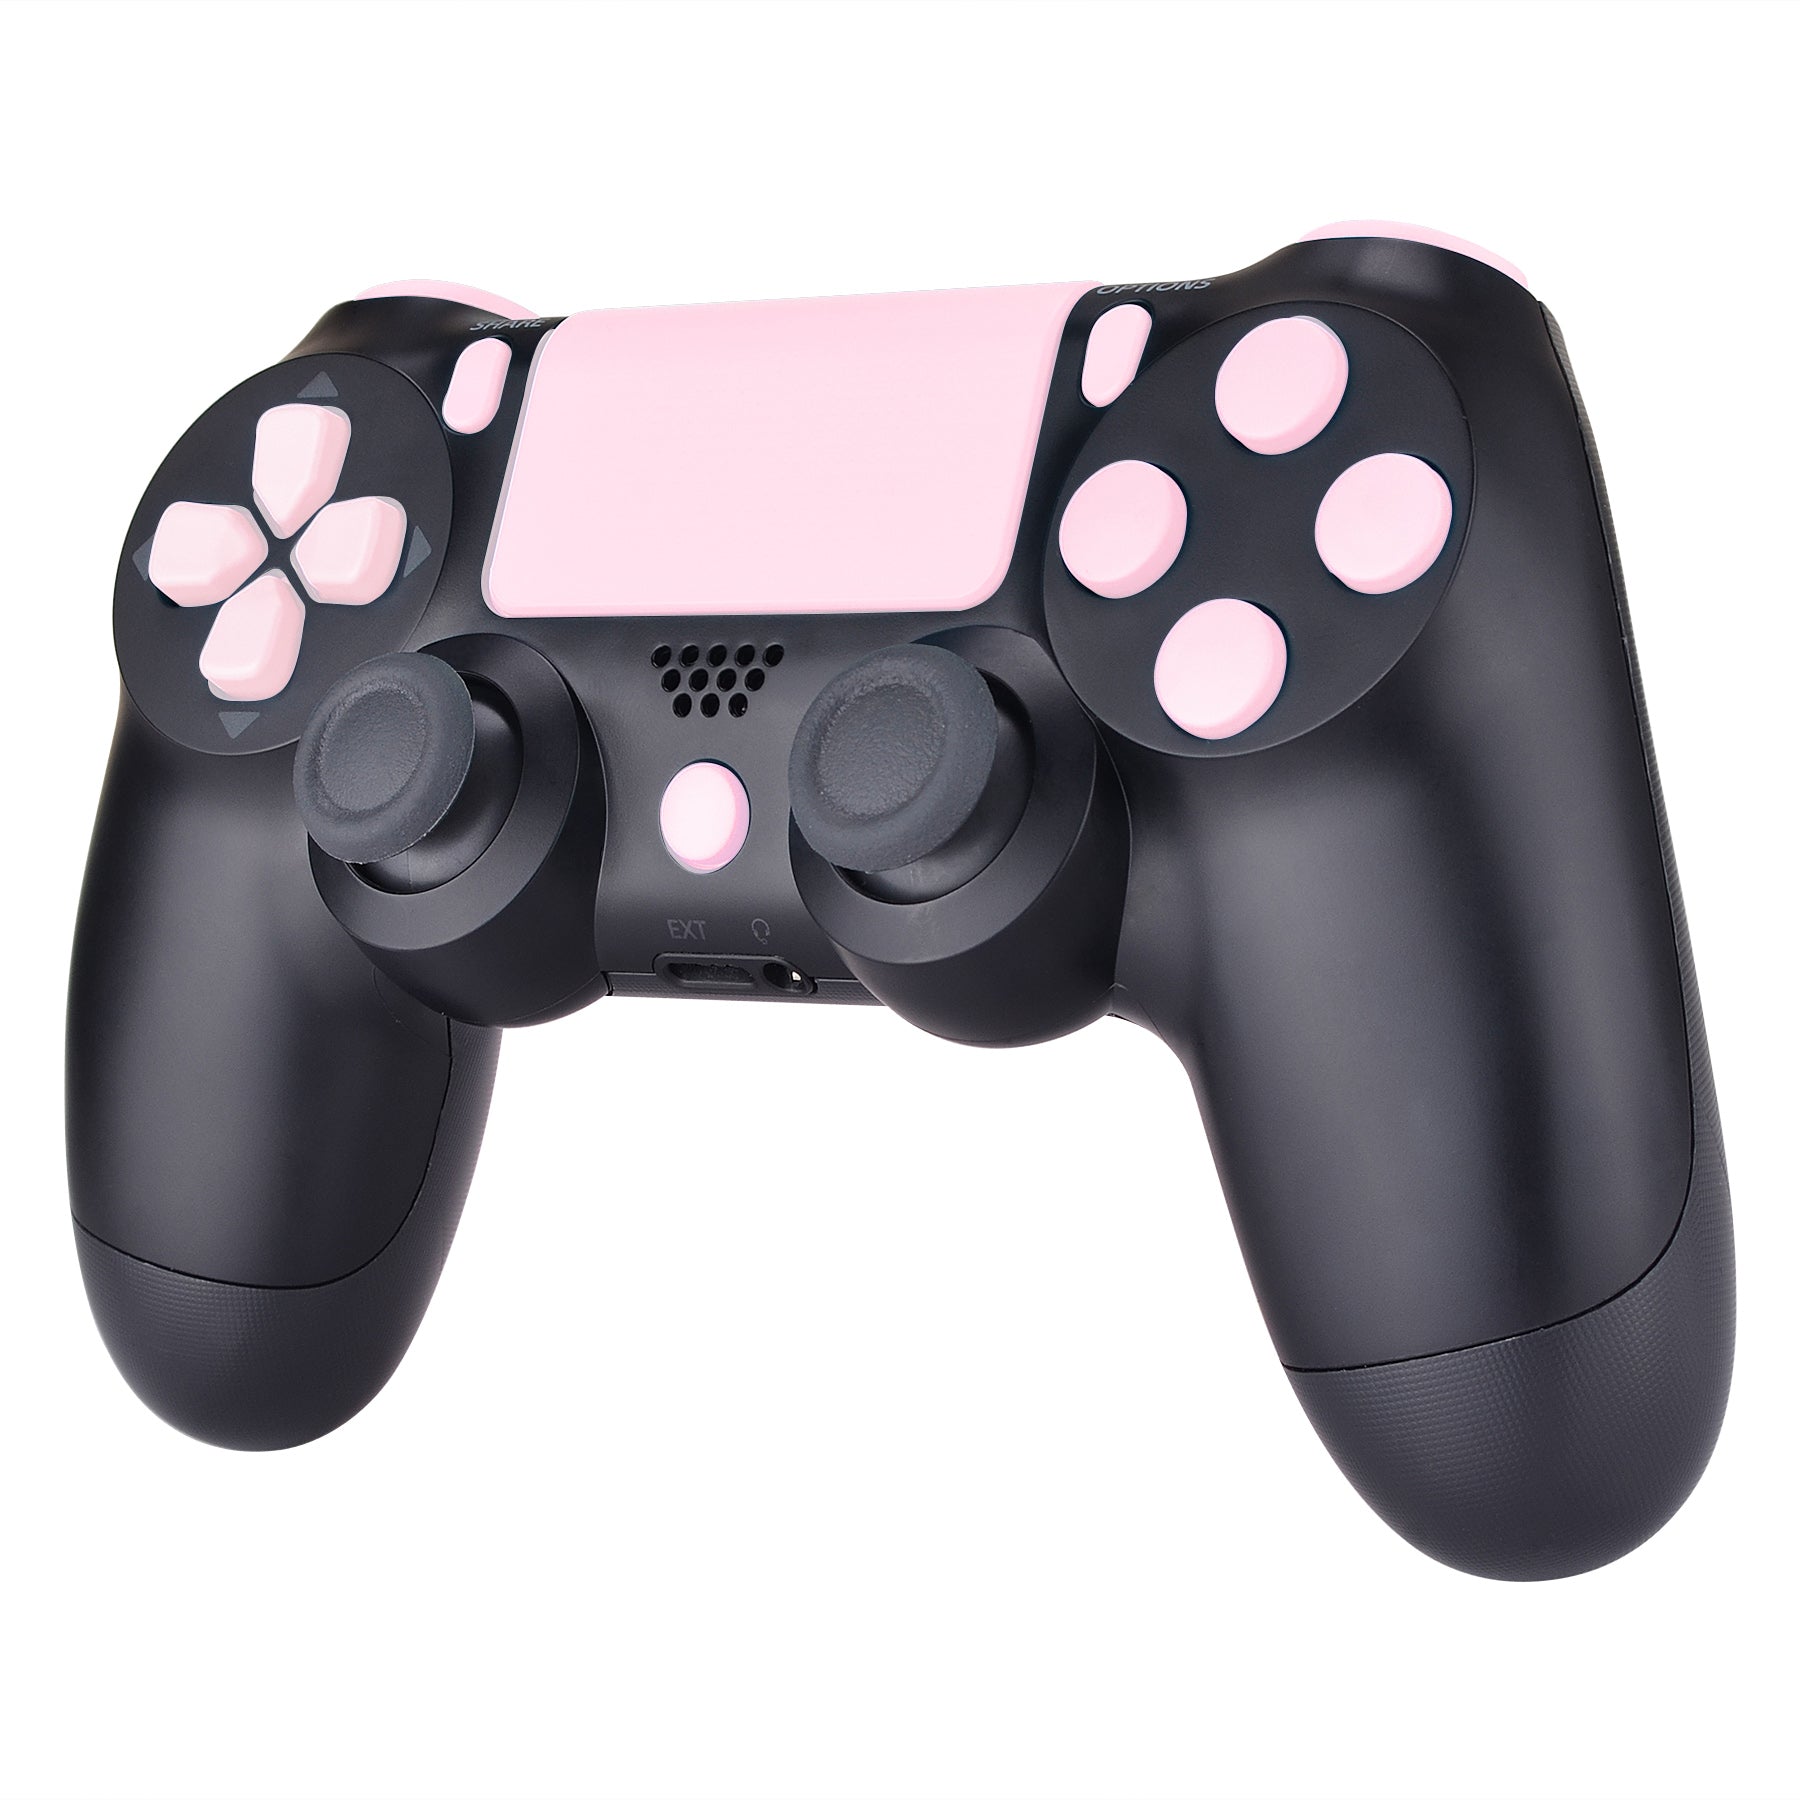 Pro Controller, Slim R2 ps4 D-pad Share Controller L2 R1 Cherry Triggers Pink Kit L1 for ps4 eXtremeRate Replacement Full Set Buttons for Blossoms – Action Buttons eXtremeRate Home Repair Touchpad Options